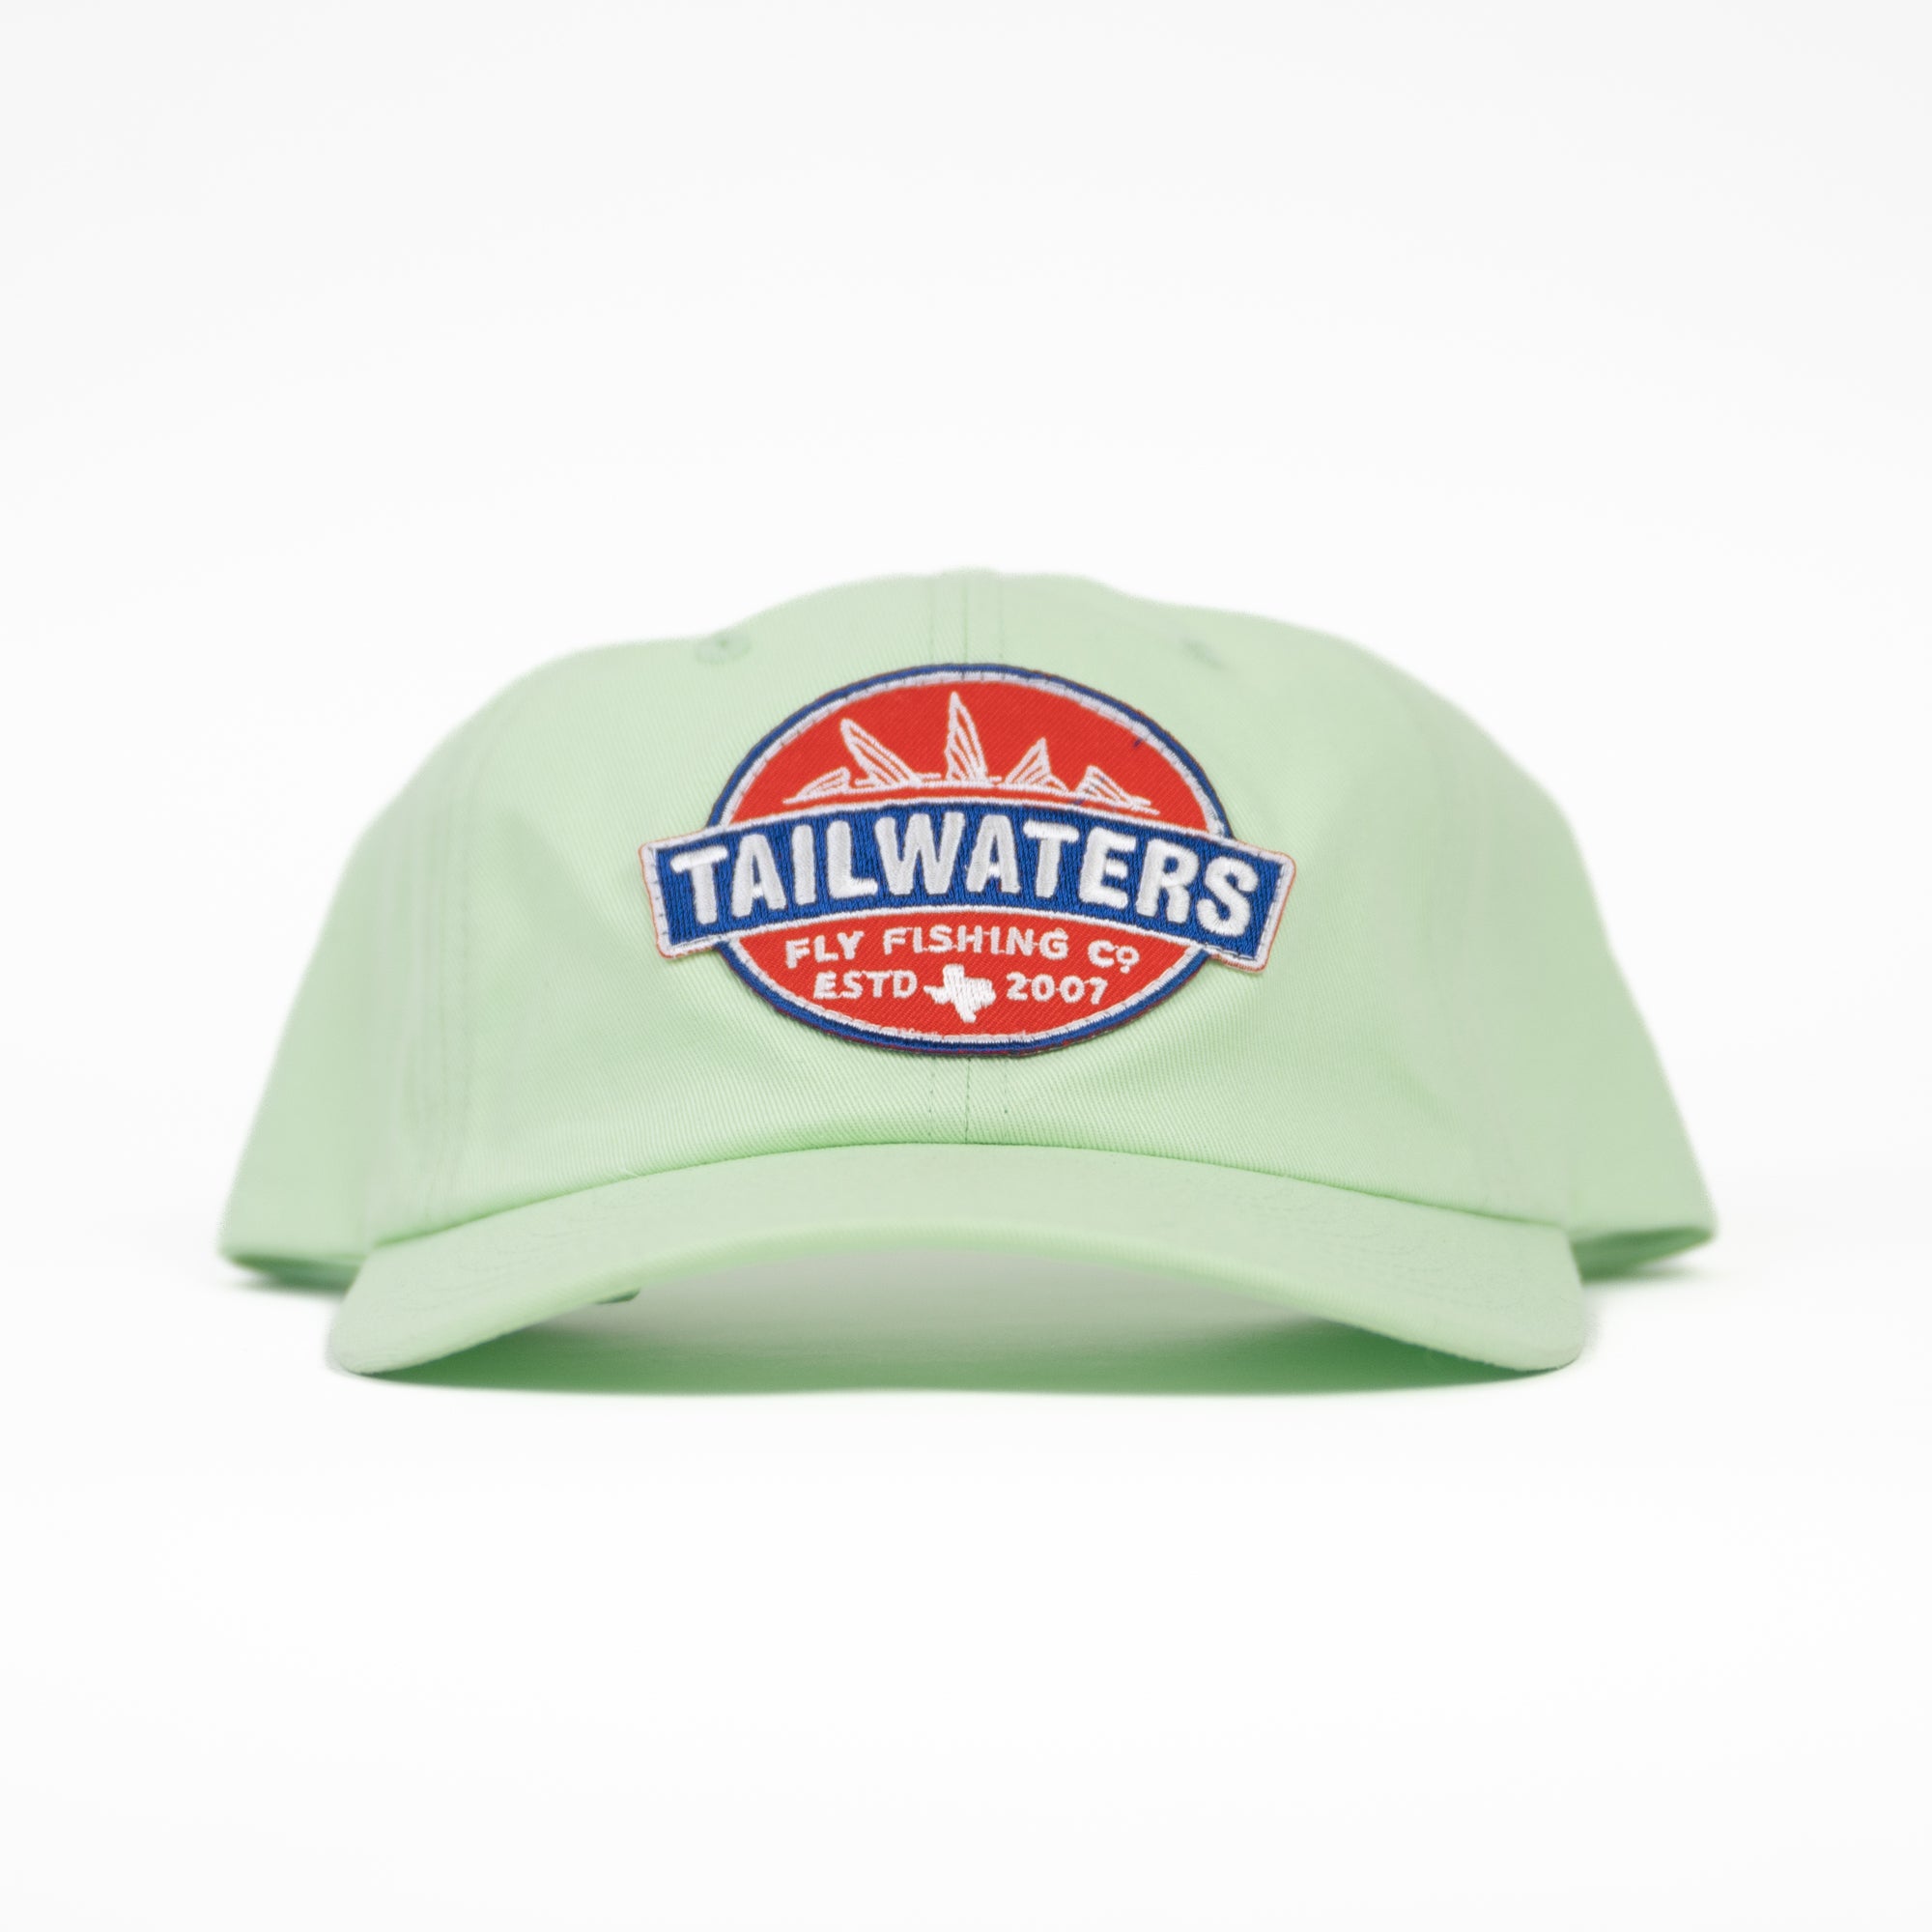 Tailwaters Fly Fishing Trout Food Roper Hat